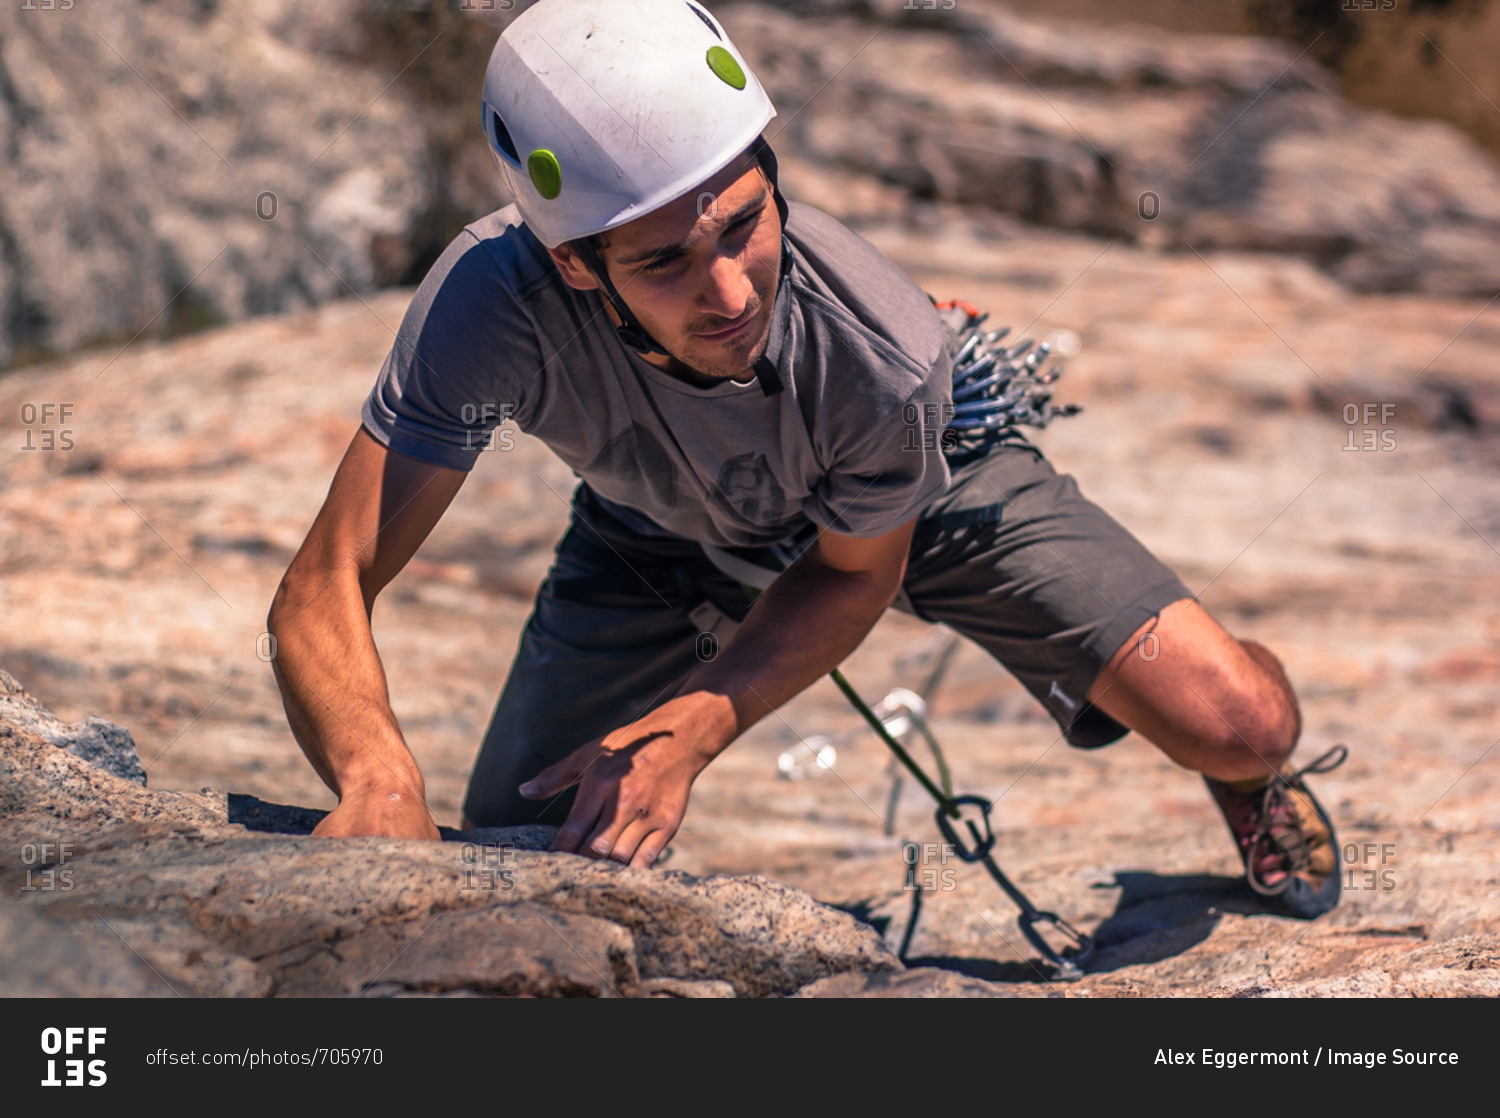 Young man, sport climbing, elevated view, Skaha Bluffs Provincial Park, Penticton, Canada